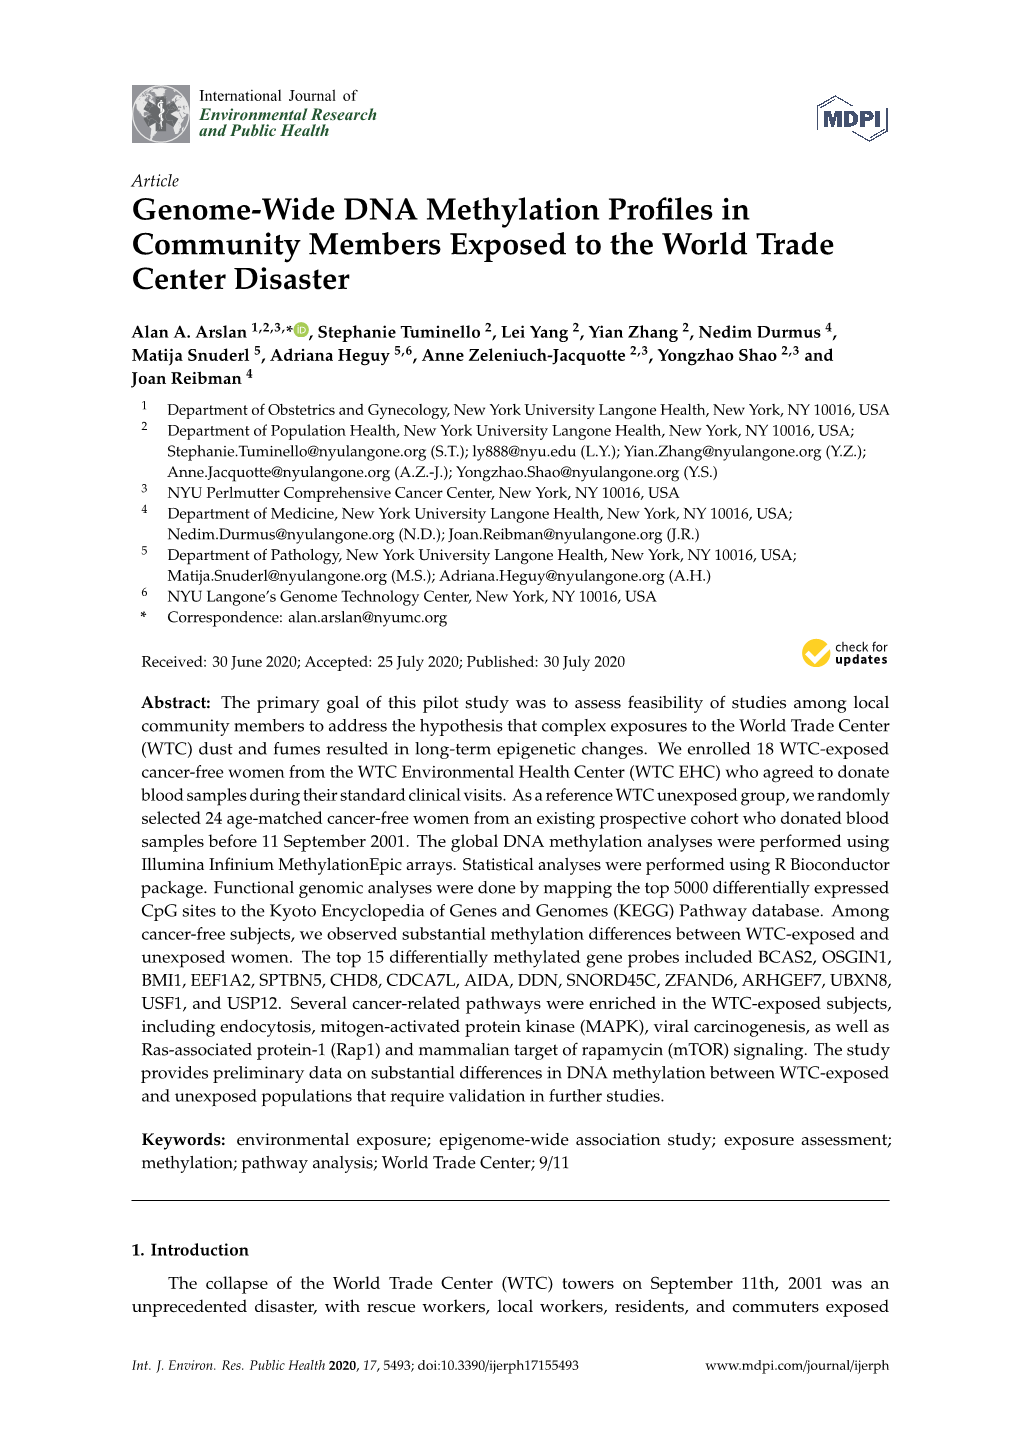 Genome-Wide DNA Methylation Profiles in Community Members Exposed to the World Trade Center Disaster